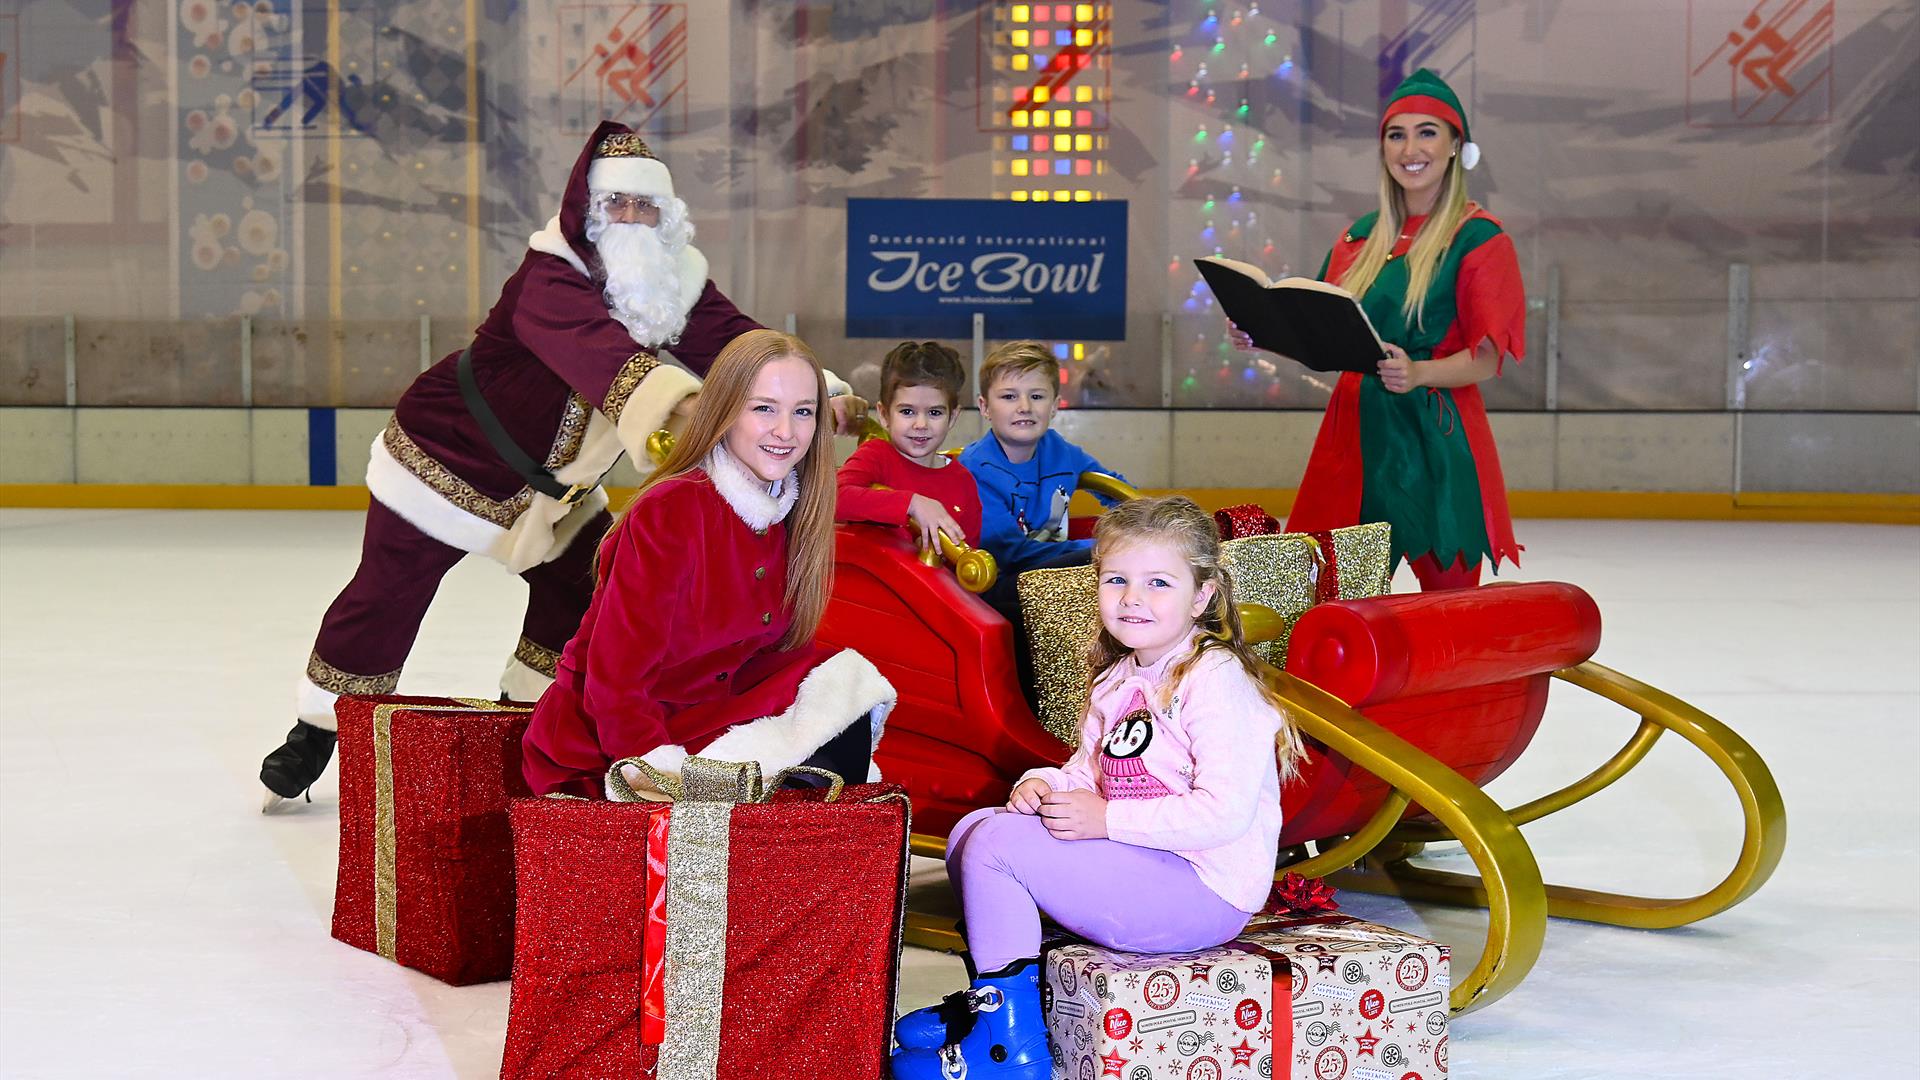 Santa pushing sleigh with two children on board, elf with book and two children sitting on Christmas Present.